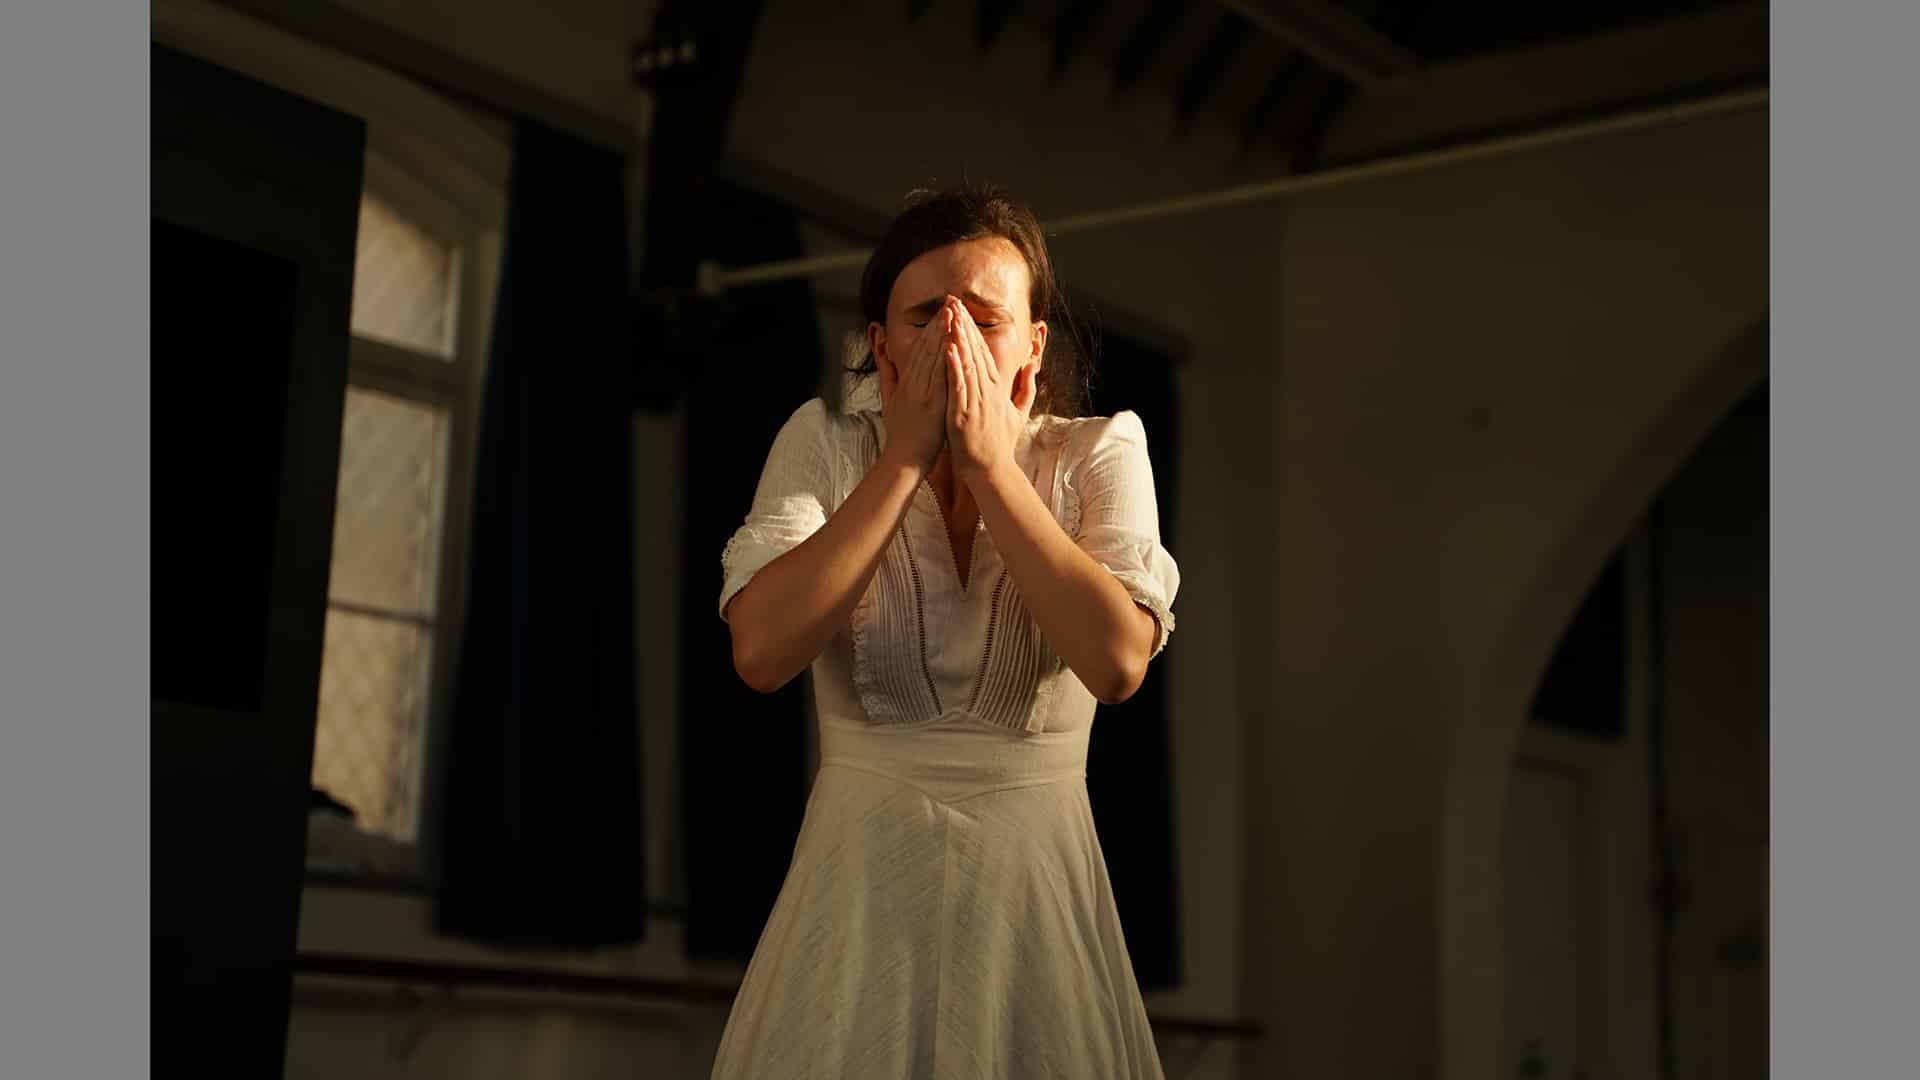 A woman covers her mouth with her hands as she cries